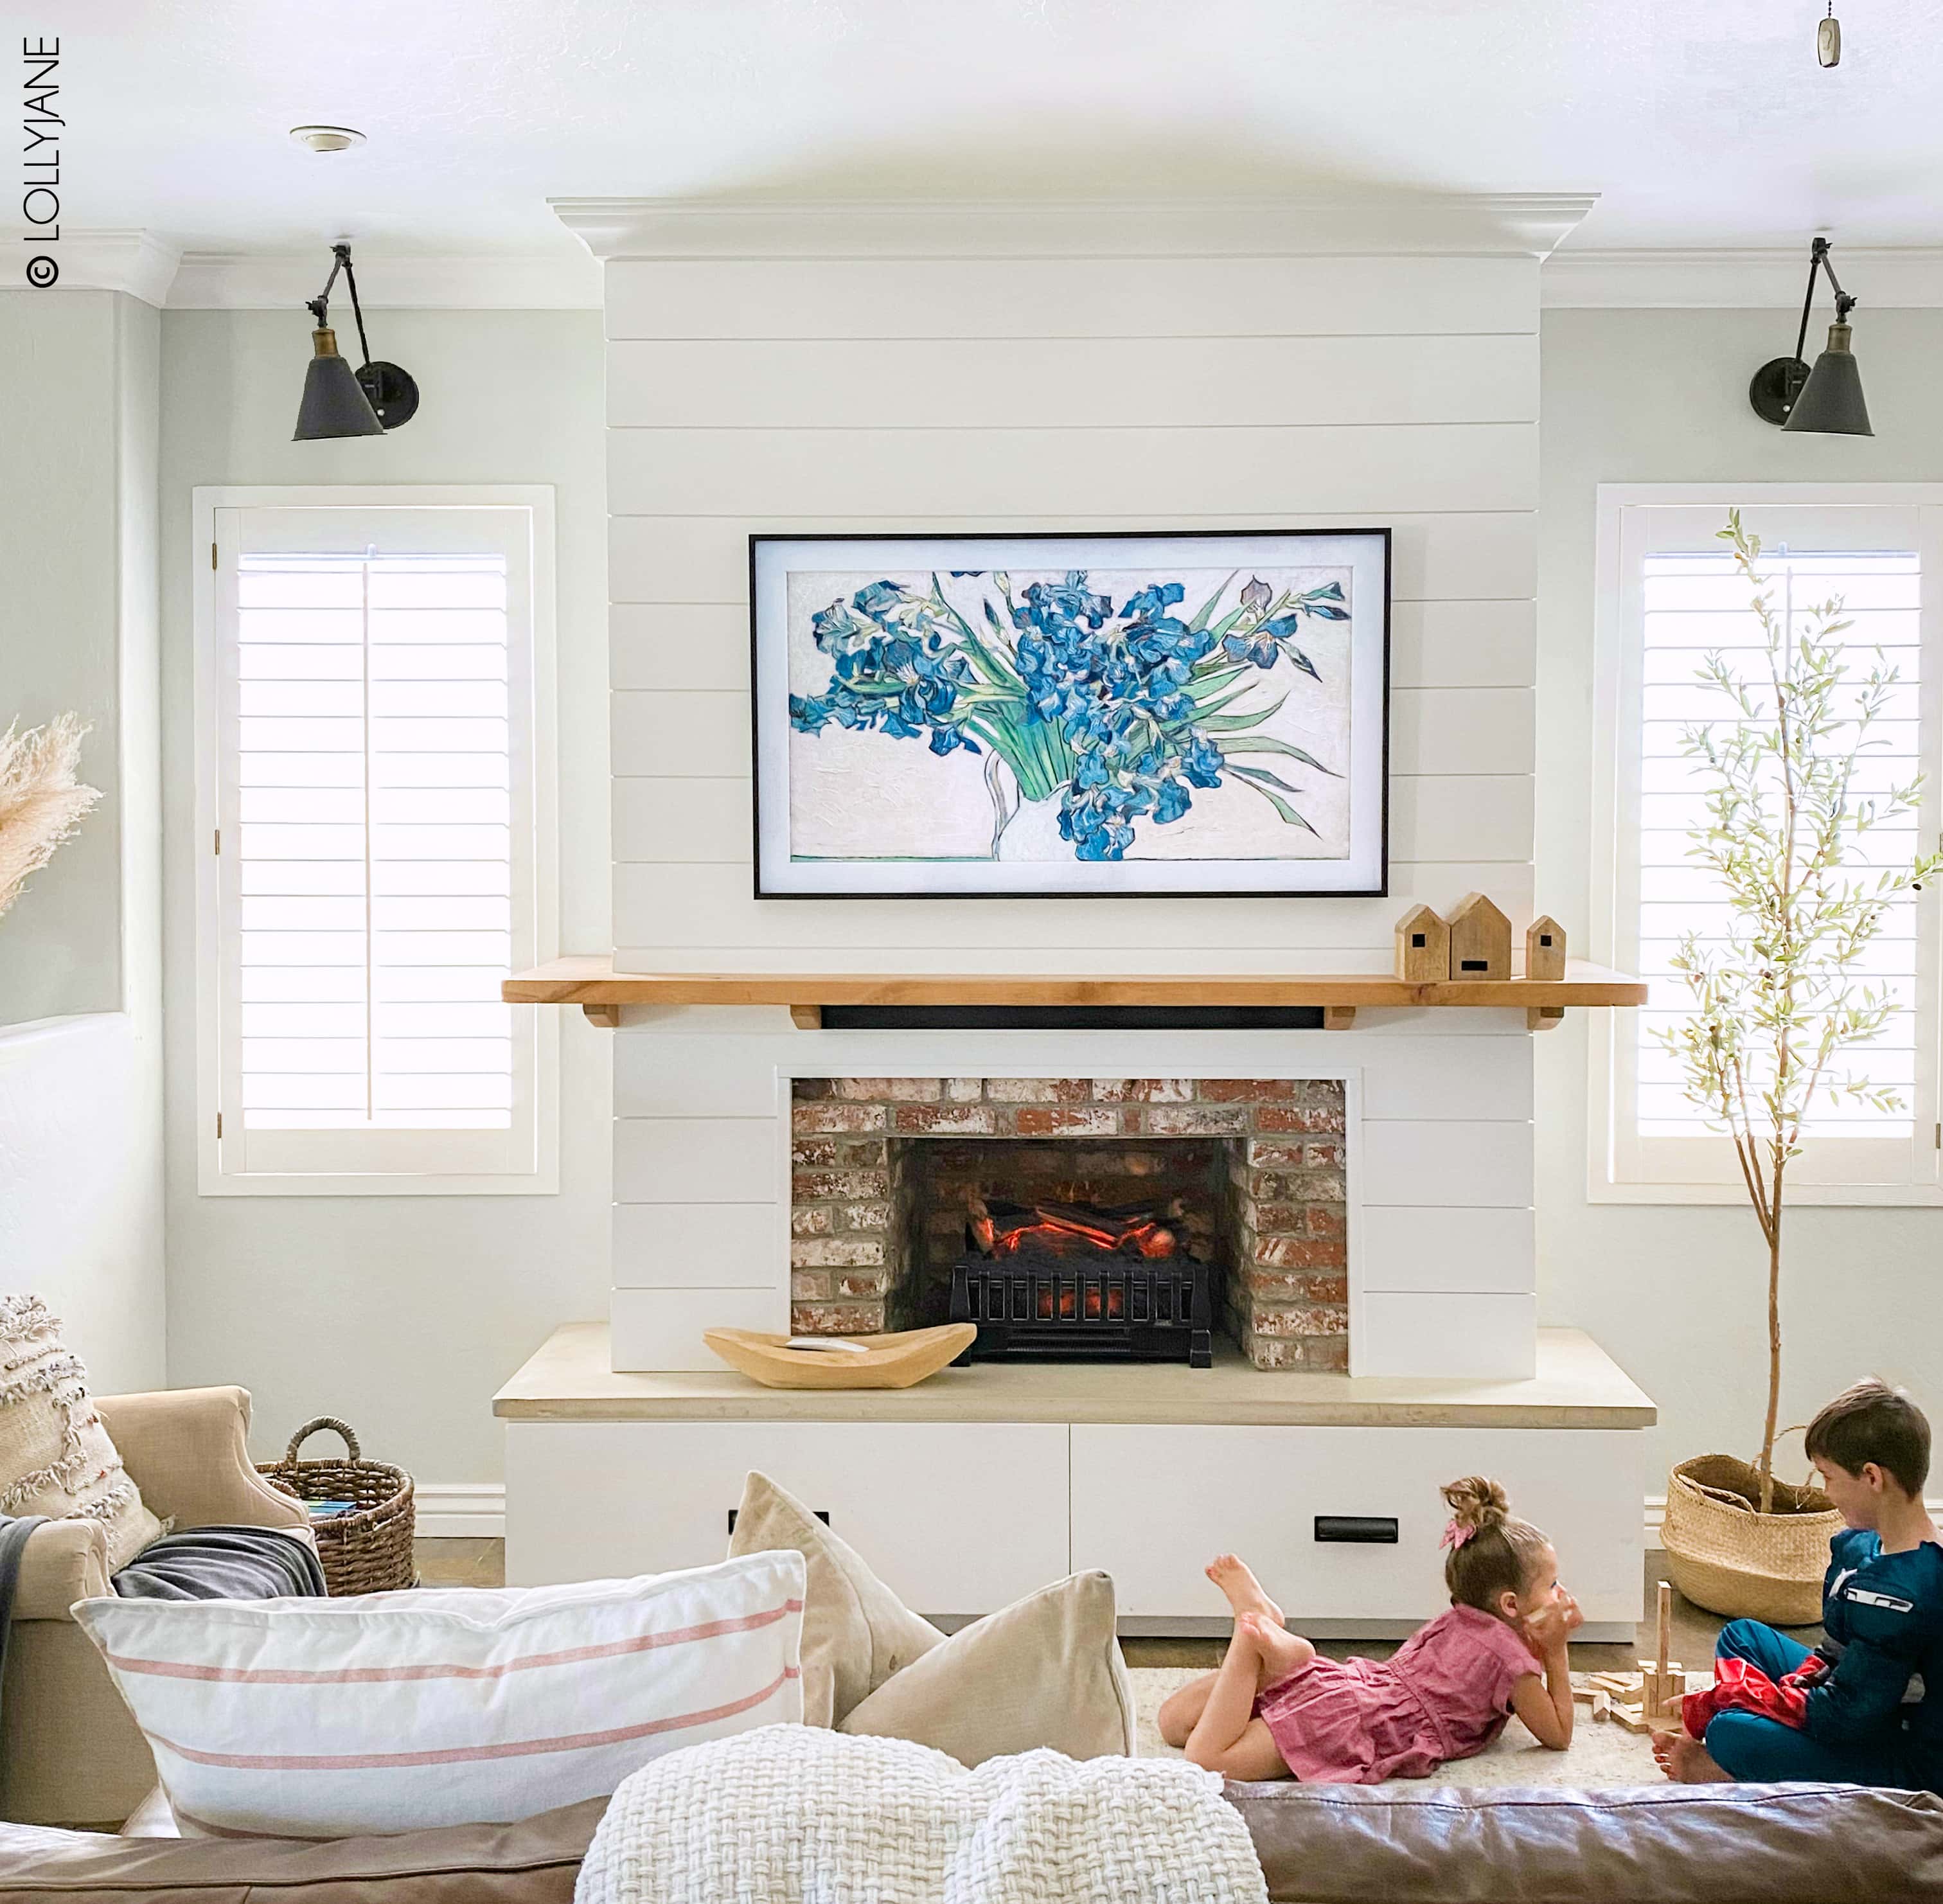 Stunning DIY Entertainment Center with 5 hidden design features that hide clutter and cords but make a BIGG statement! #modernfarmhouse #fauxfireplace #entertainmentsystem #diy #diyhomedecor